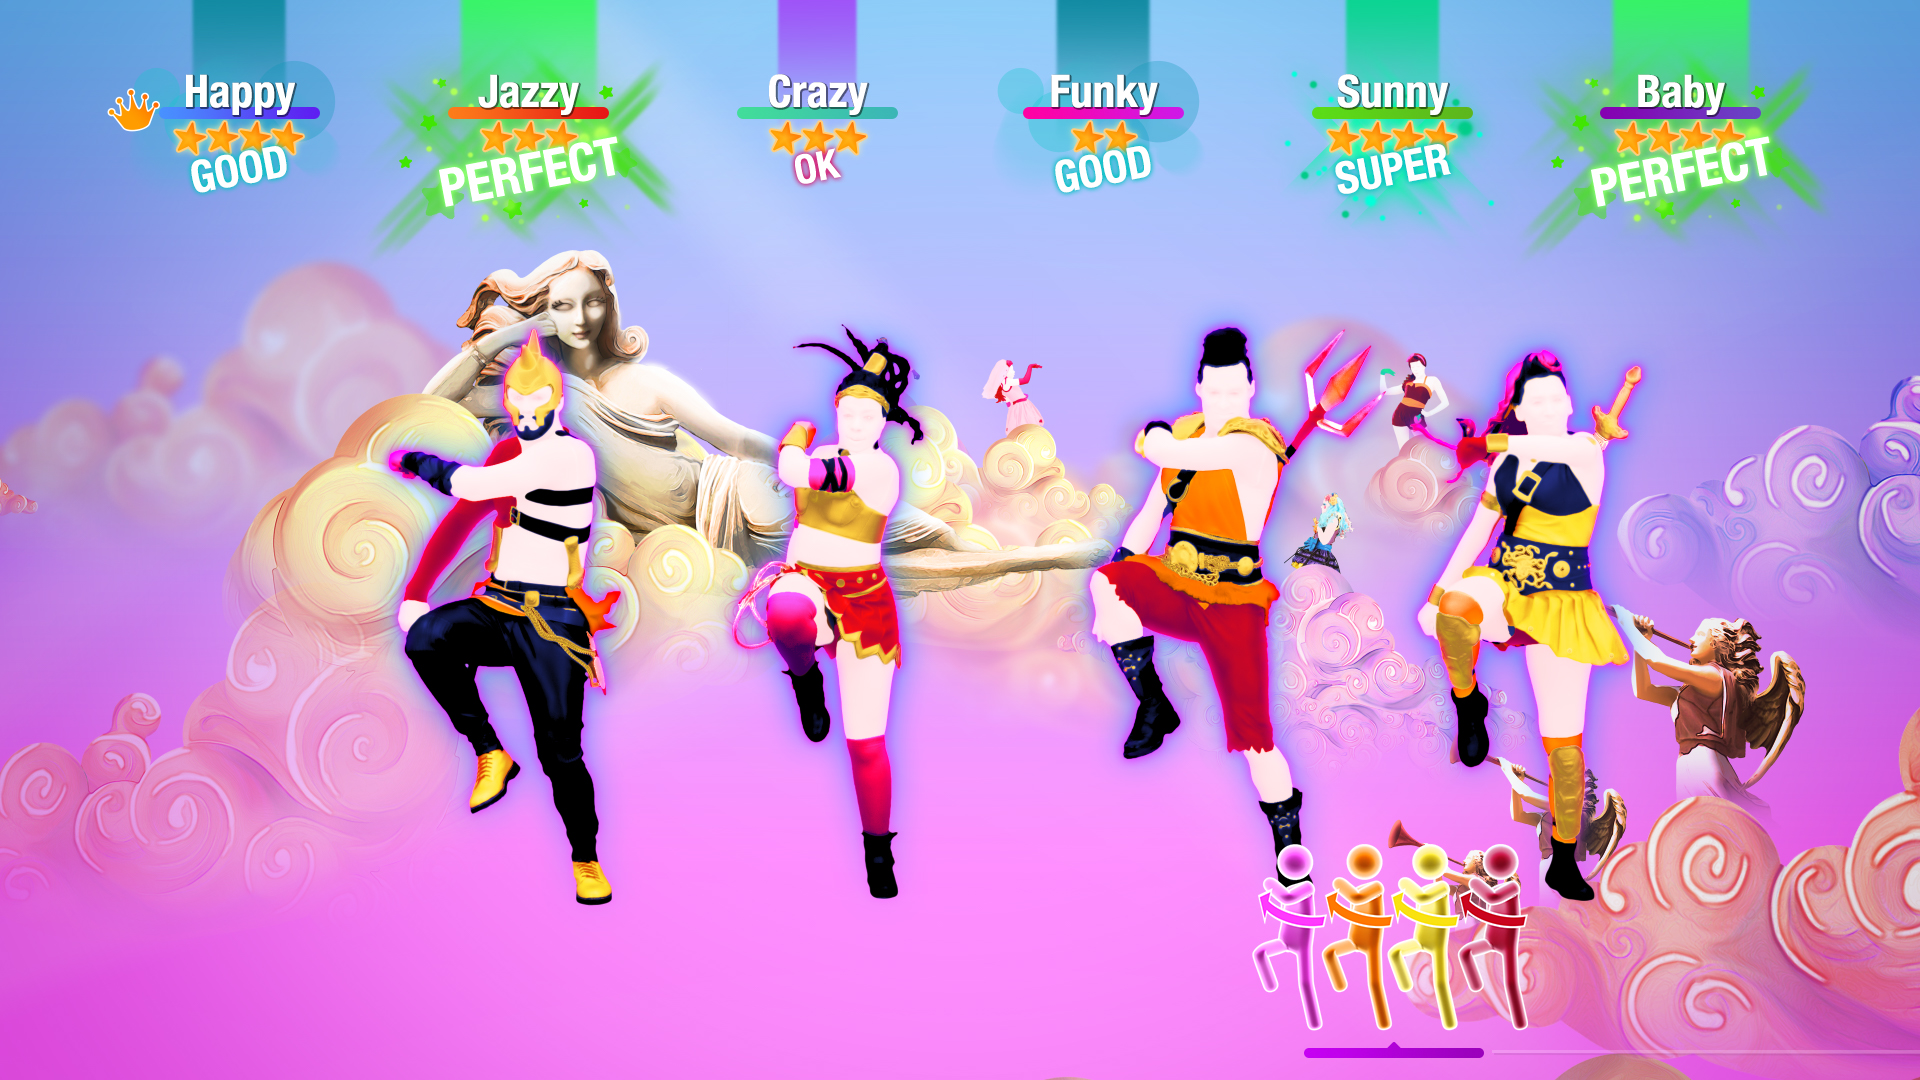 Just Dance 2020 (Code in the Box)